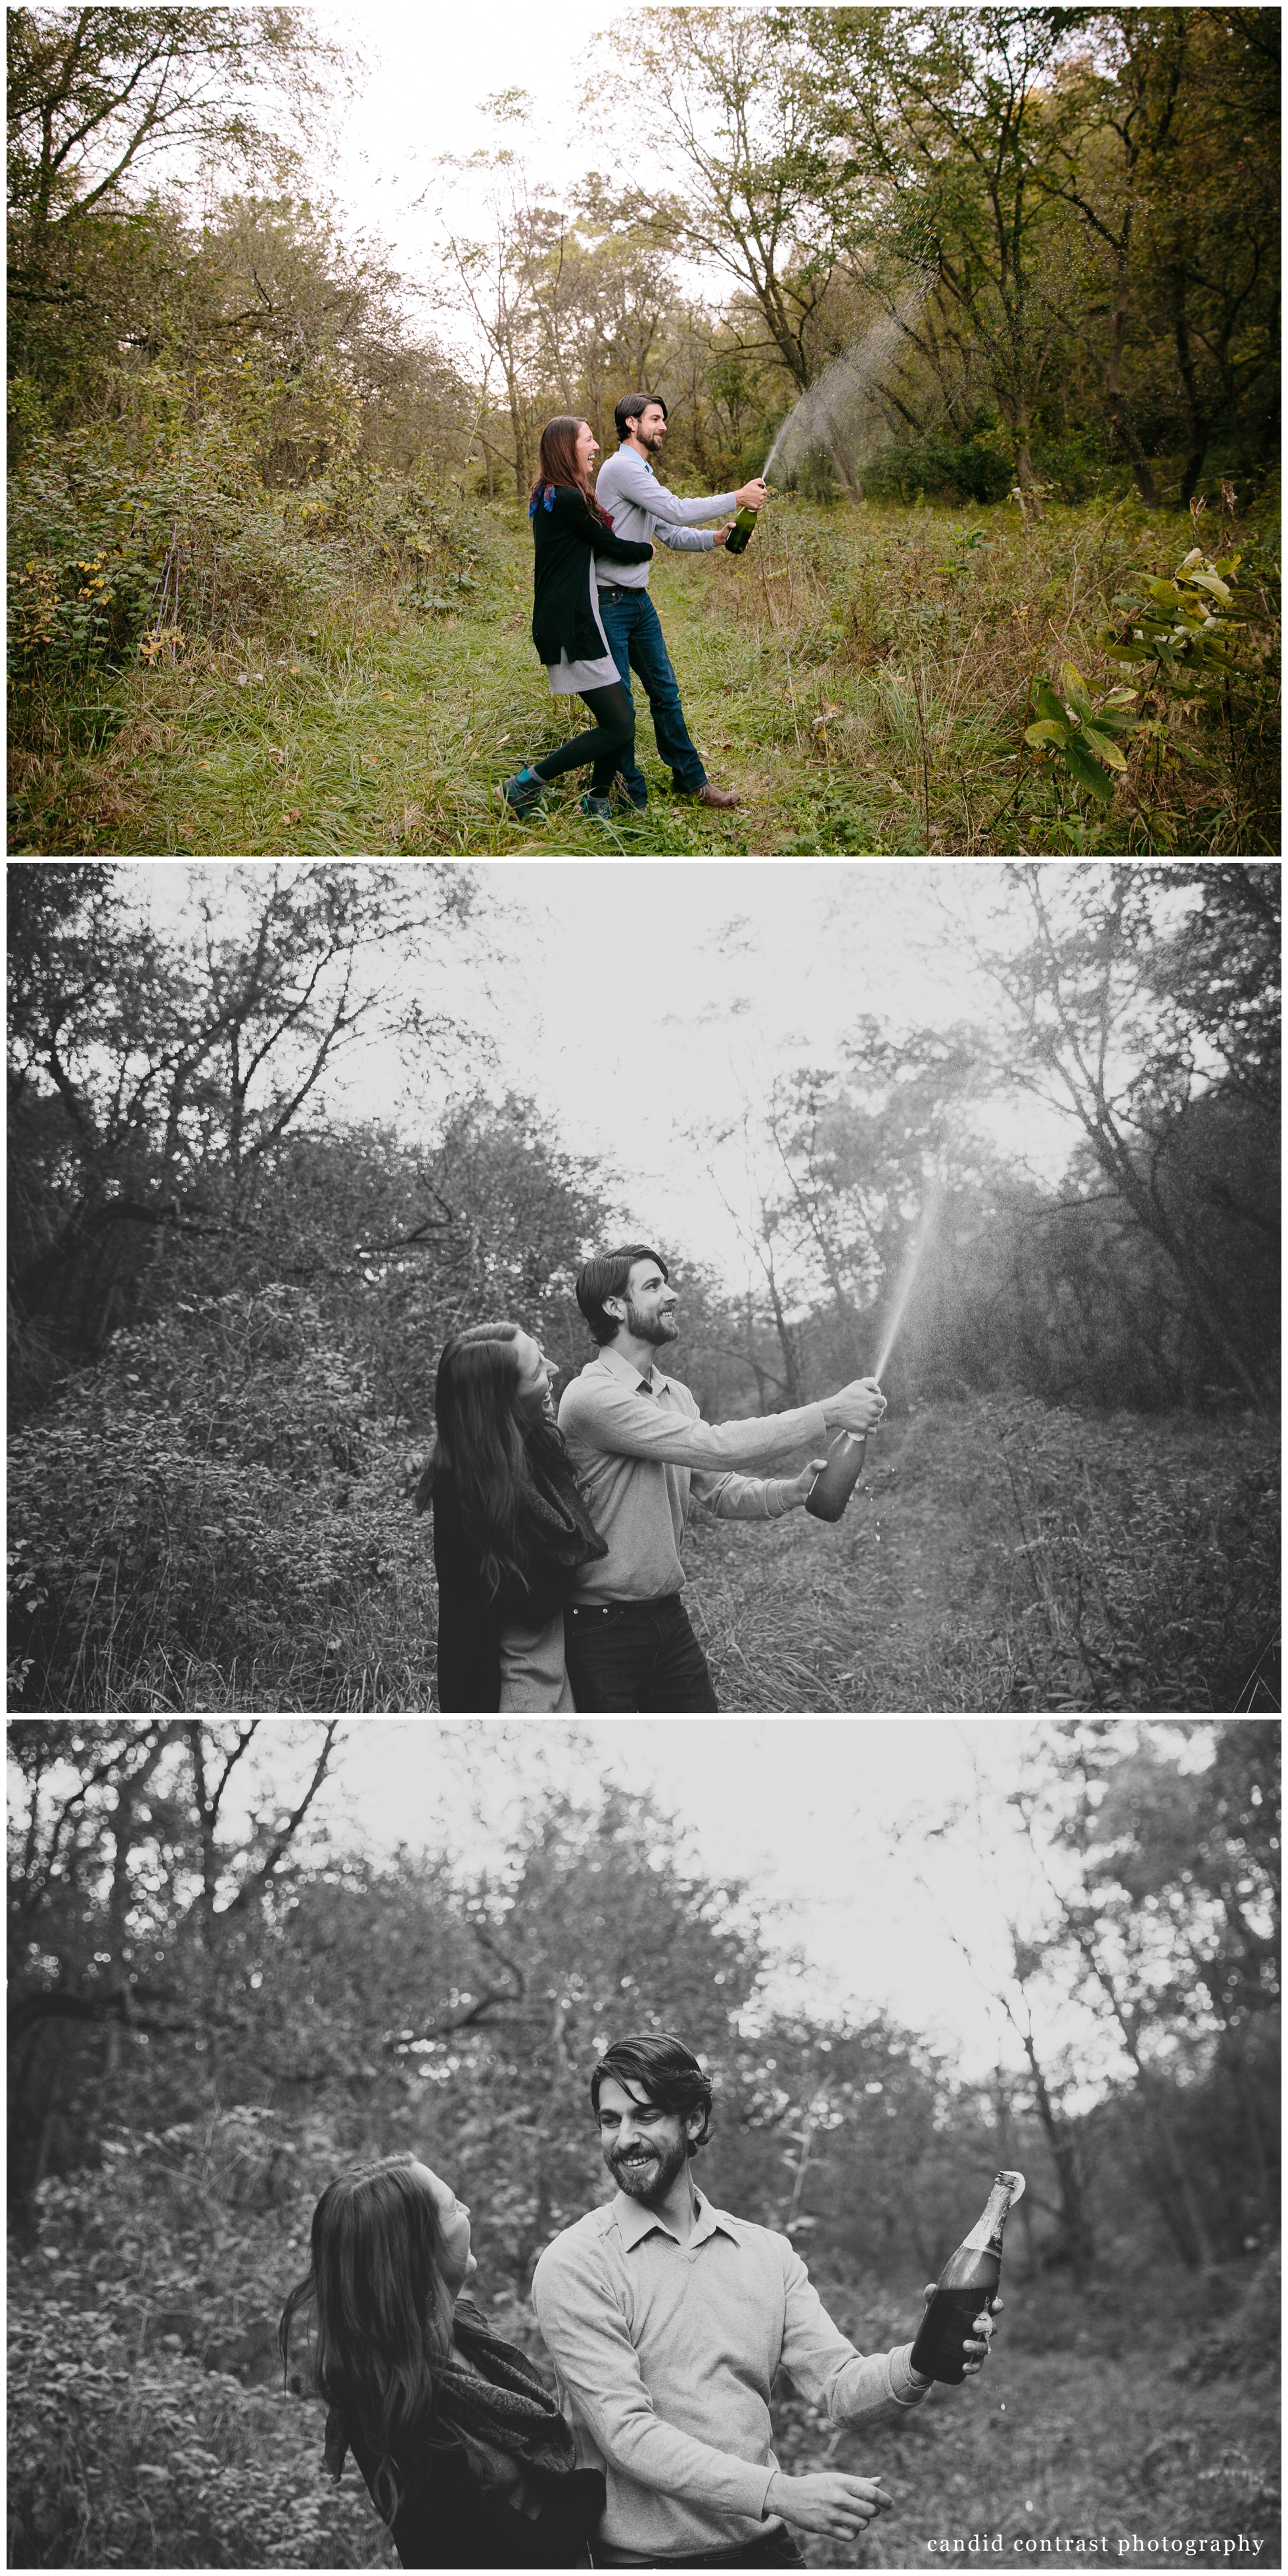 outdoor dubuque iowa picnic and champagne engagement photos, iowa wedding photographer candid contrast photography 